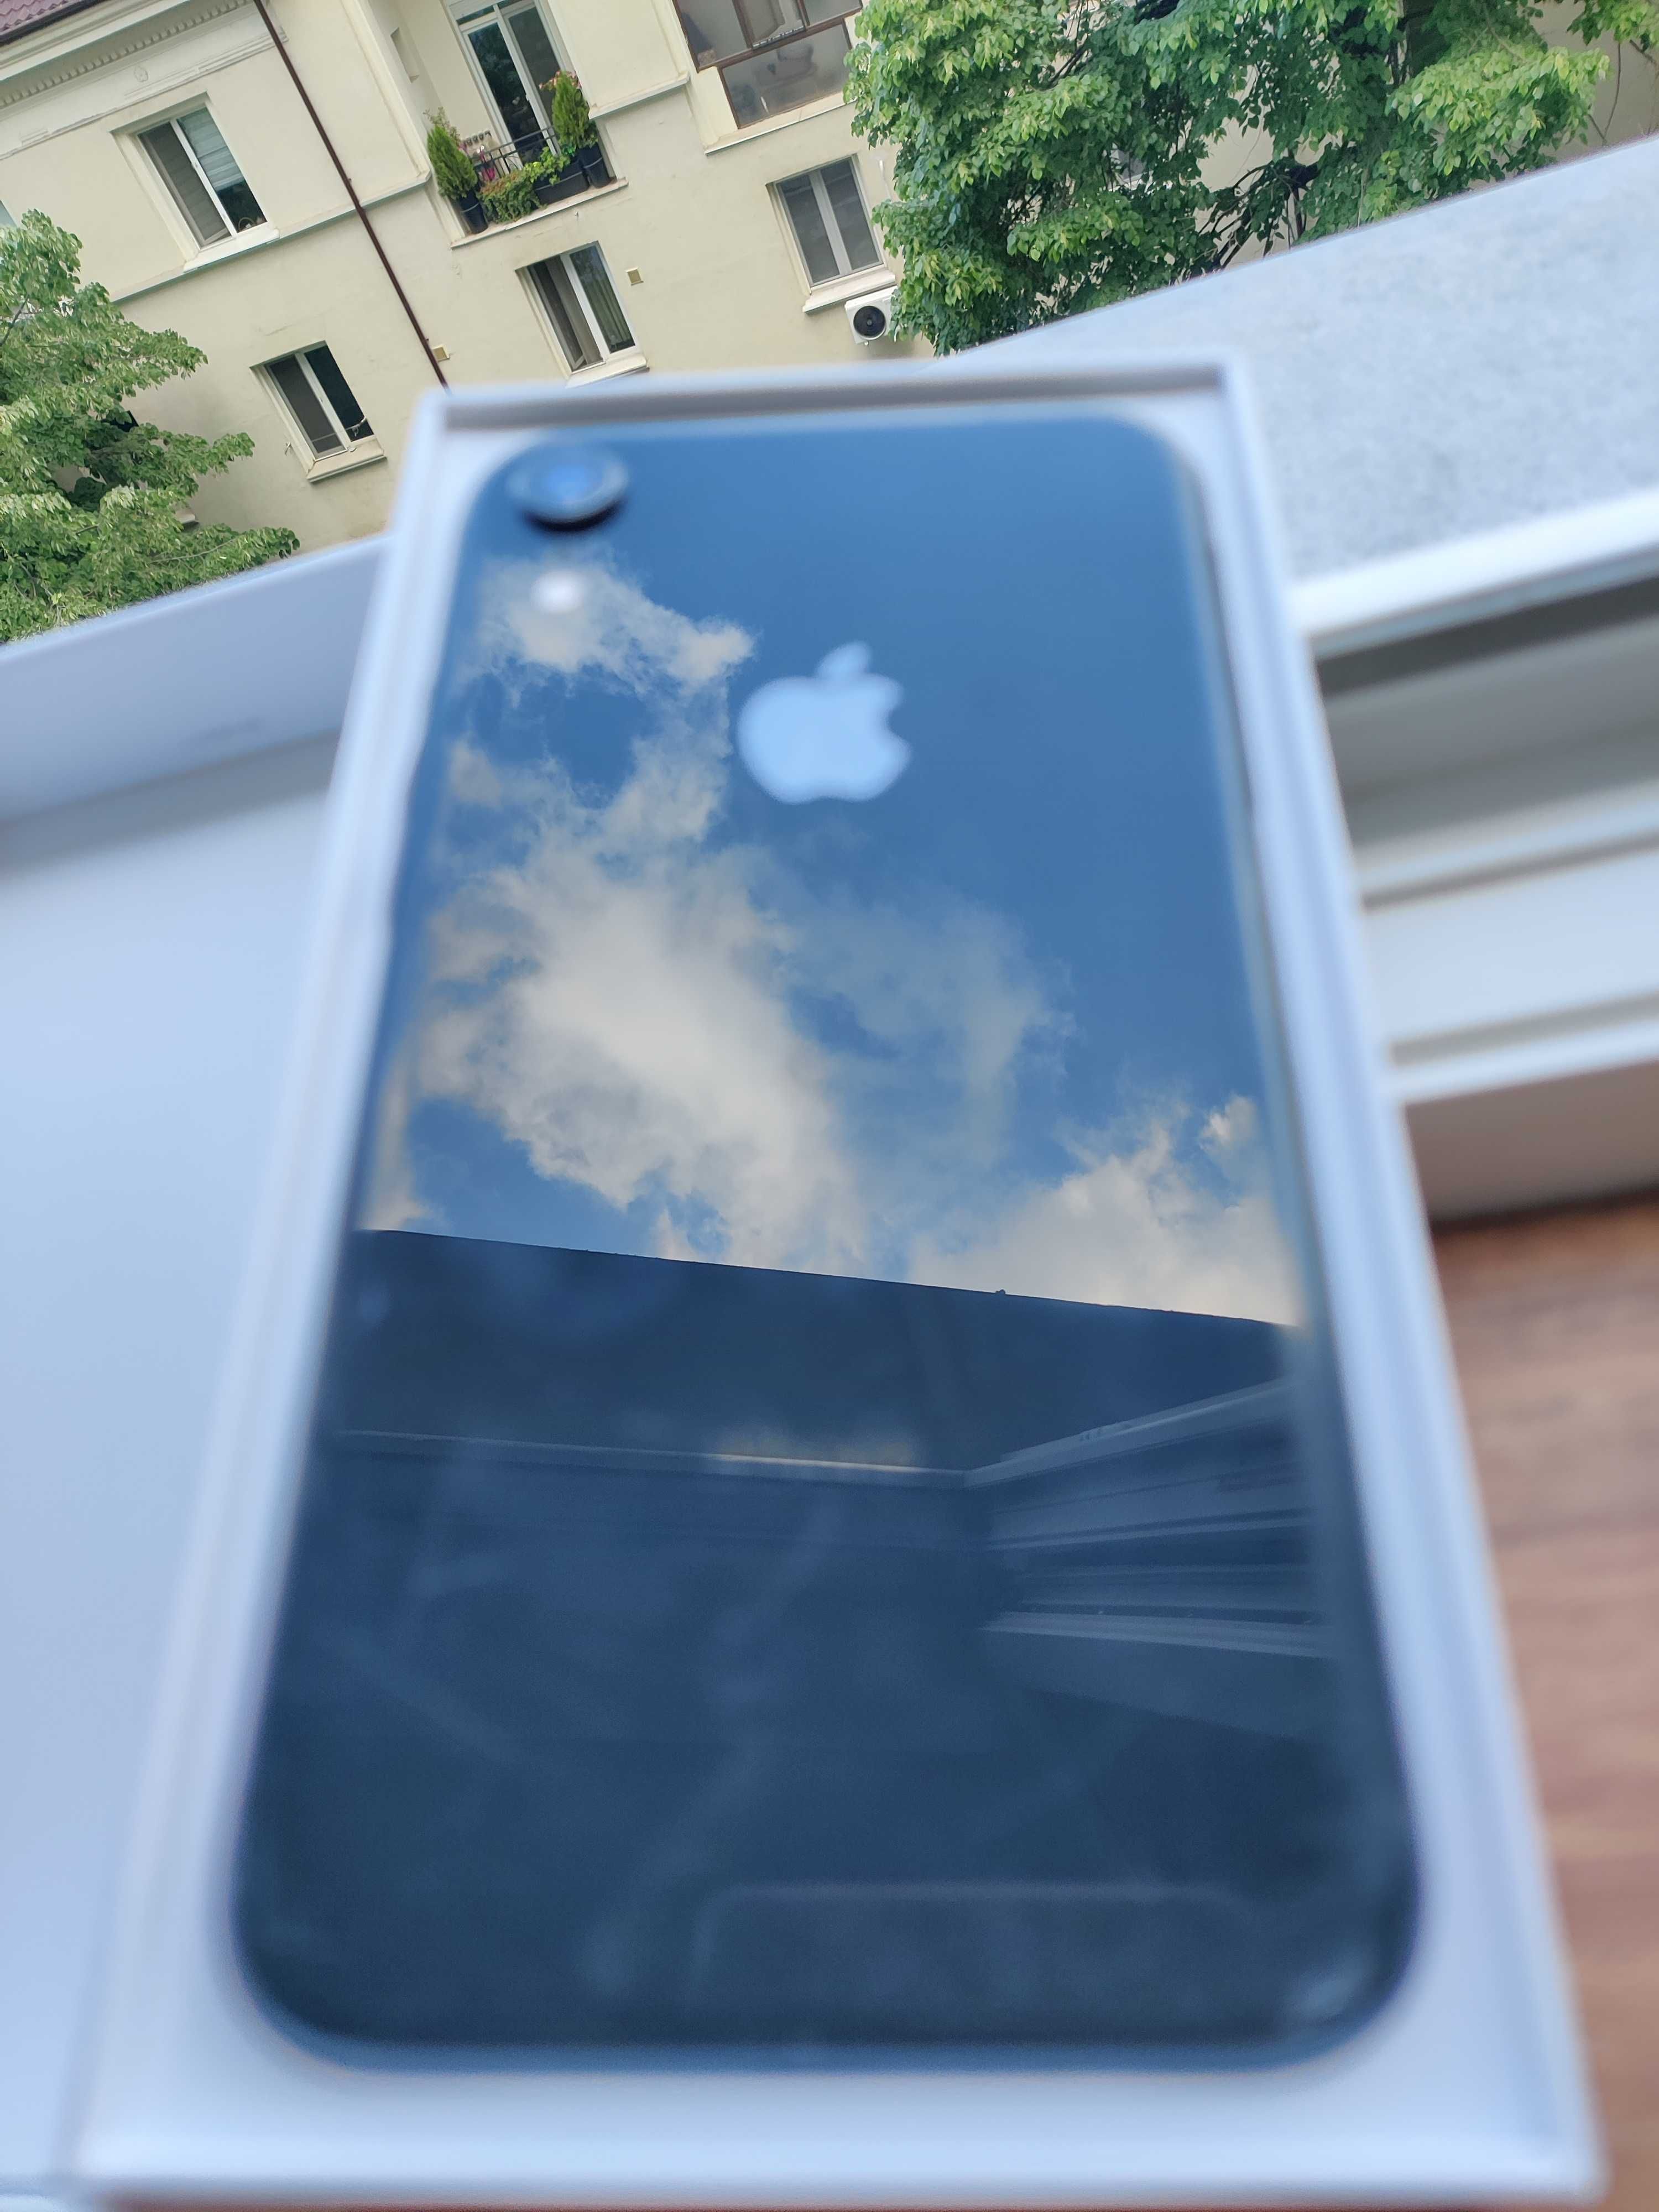 iPhone XR Space Gray 64 GB